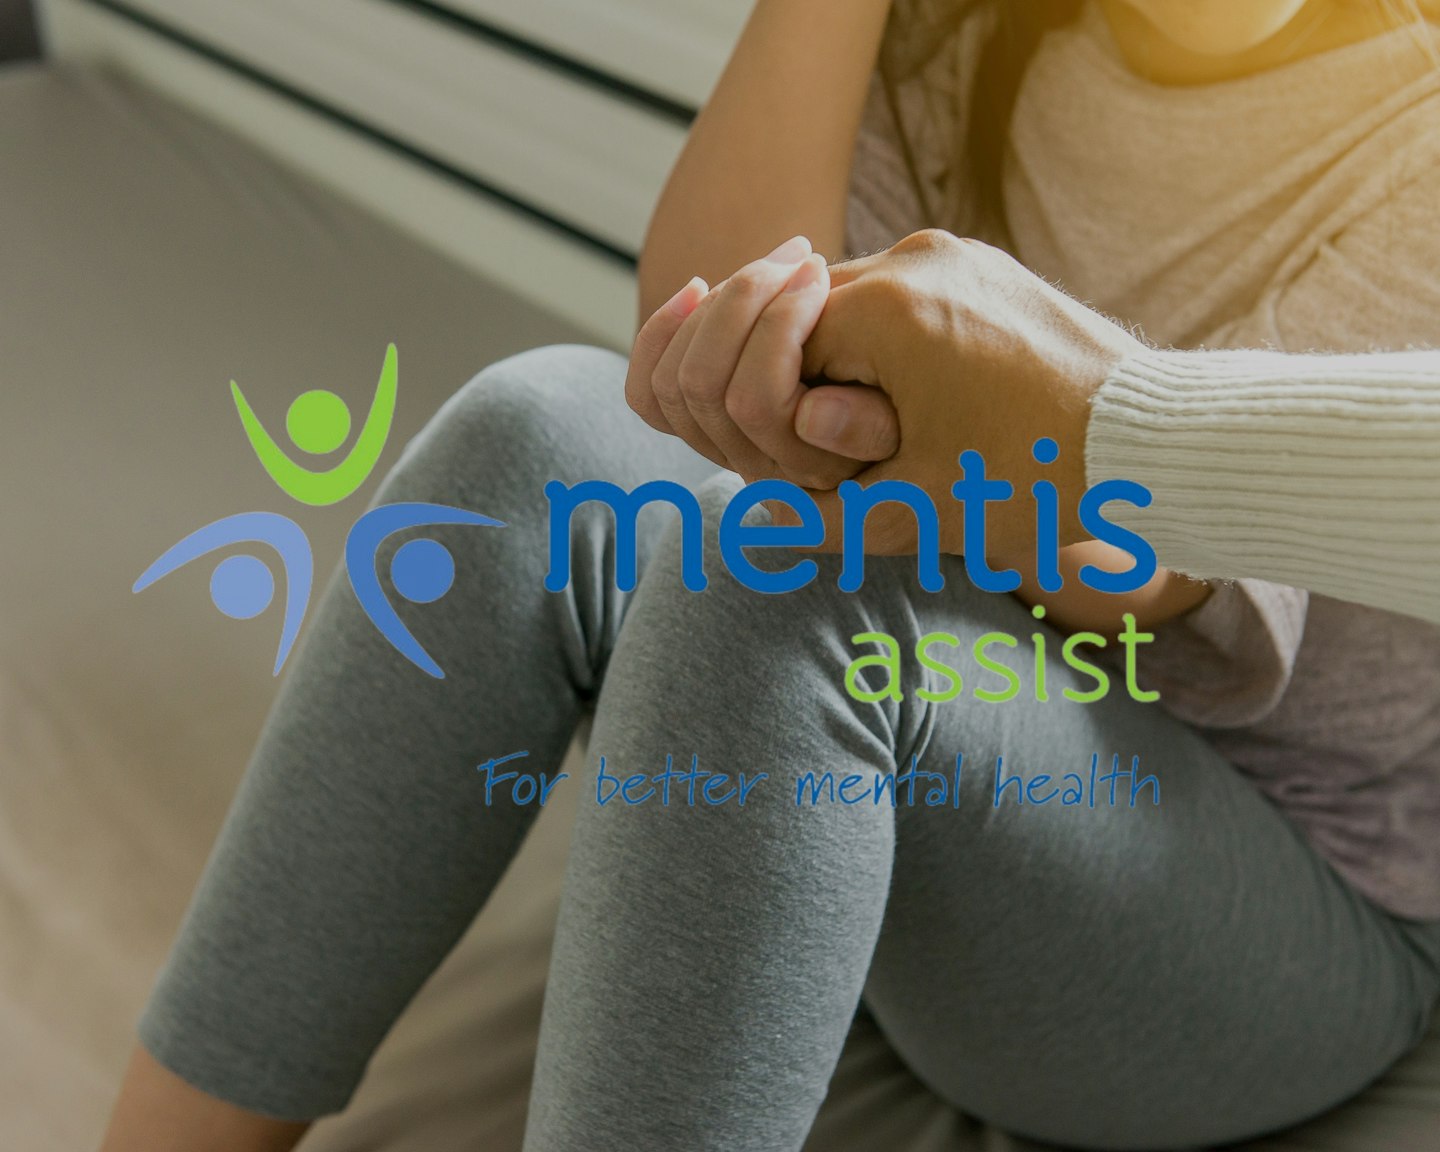 Text 'mentis assist' overlaying an image of a person holding a child's hand